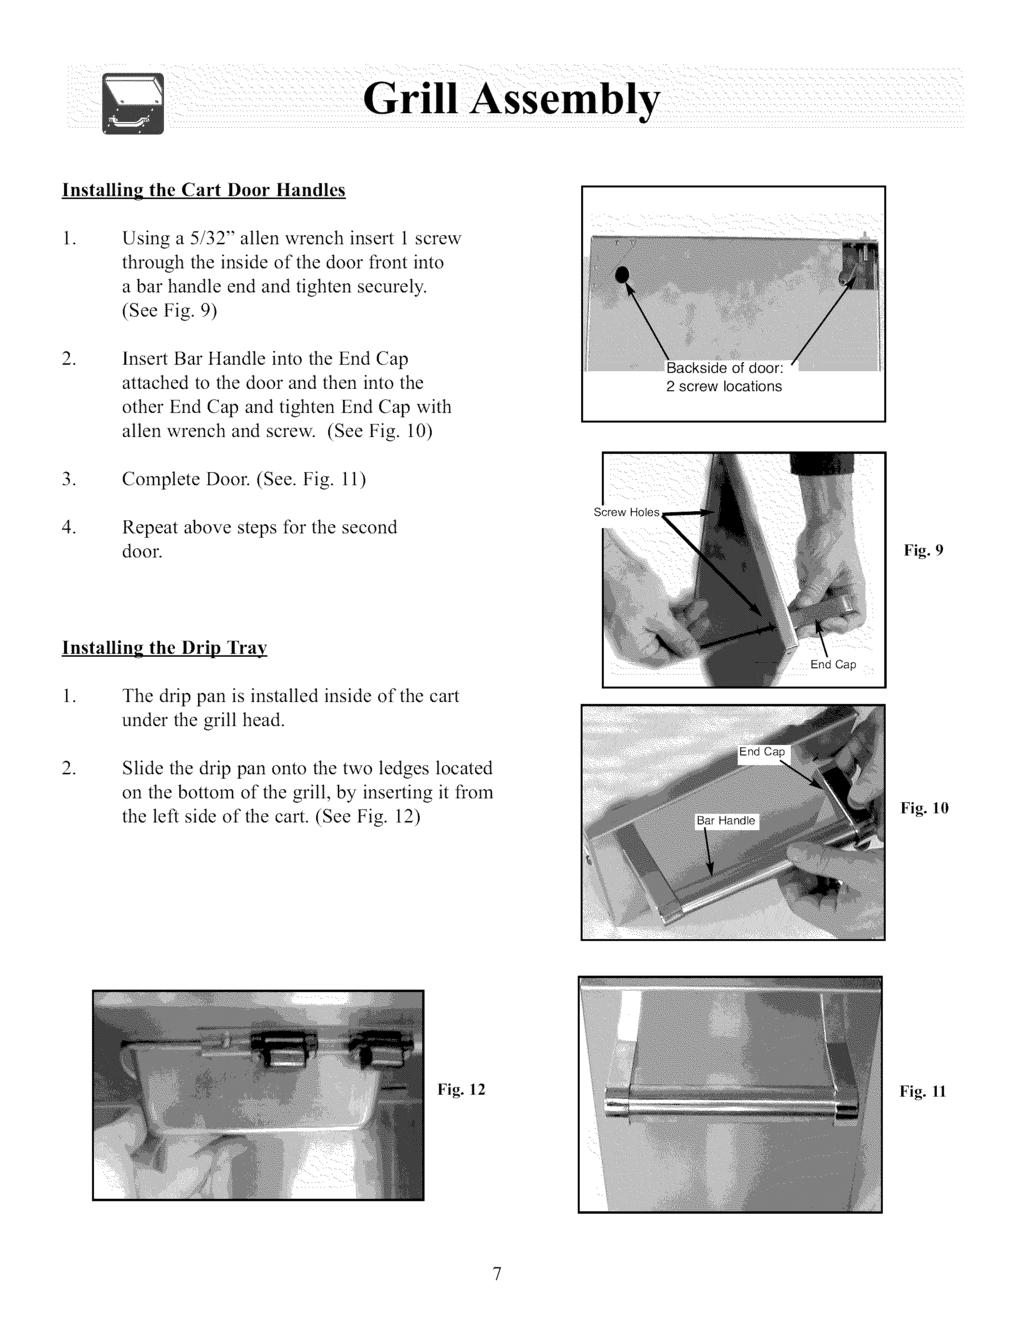 Installing the Cart Door Handles Using a 5/32" allen wrench insert 1 screw through the inside of the door front into a bar handle end and tighten securely (See Fig 9) Insert Bar tlandle into the End